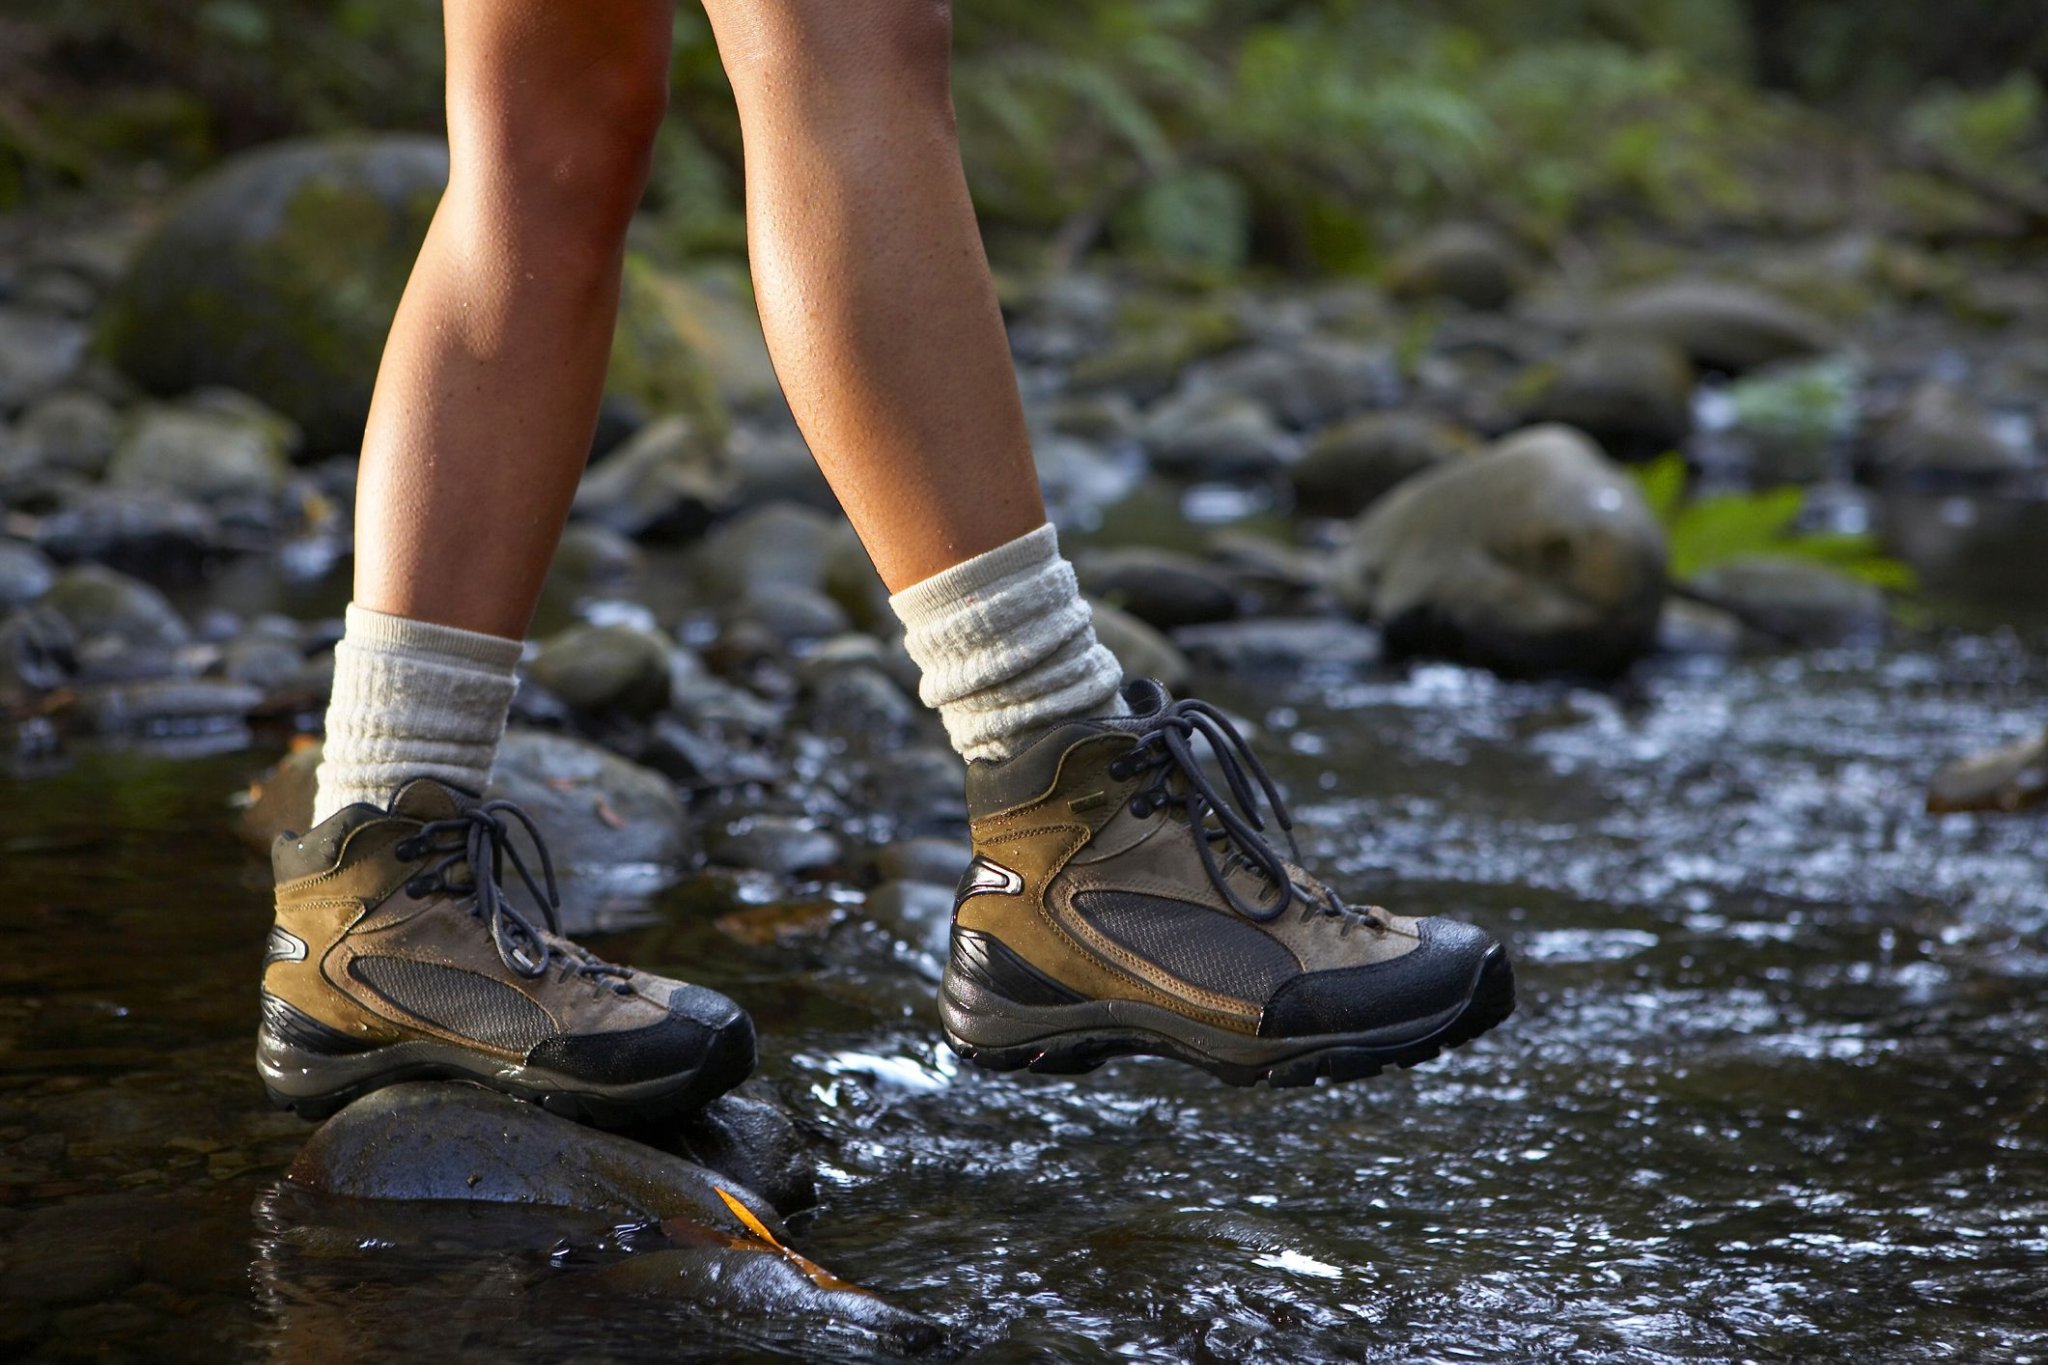 The Complete Guide to Choosing Hiking Boots, Shoes, and Sandals